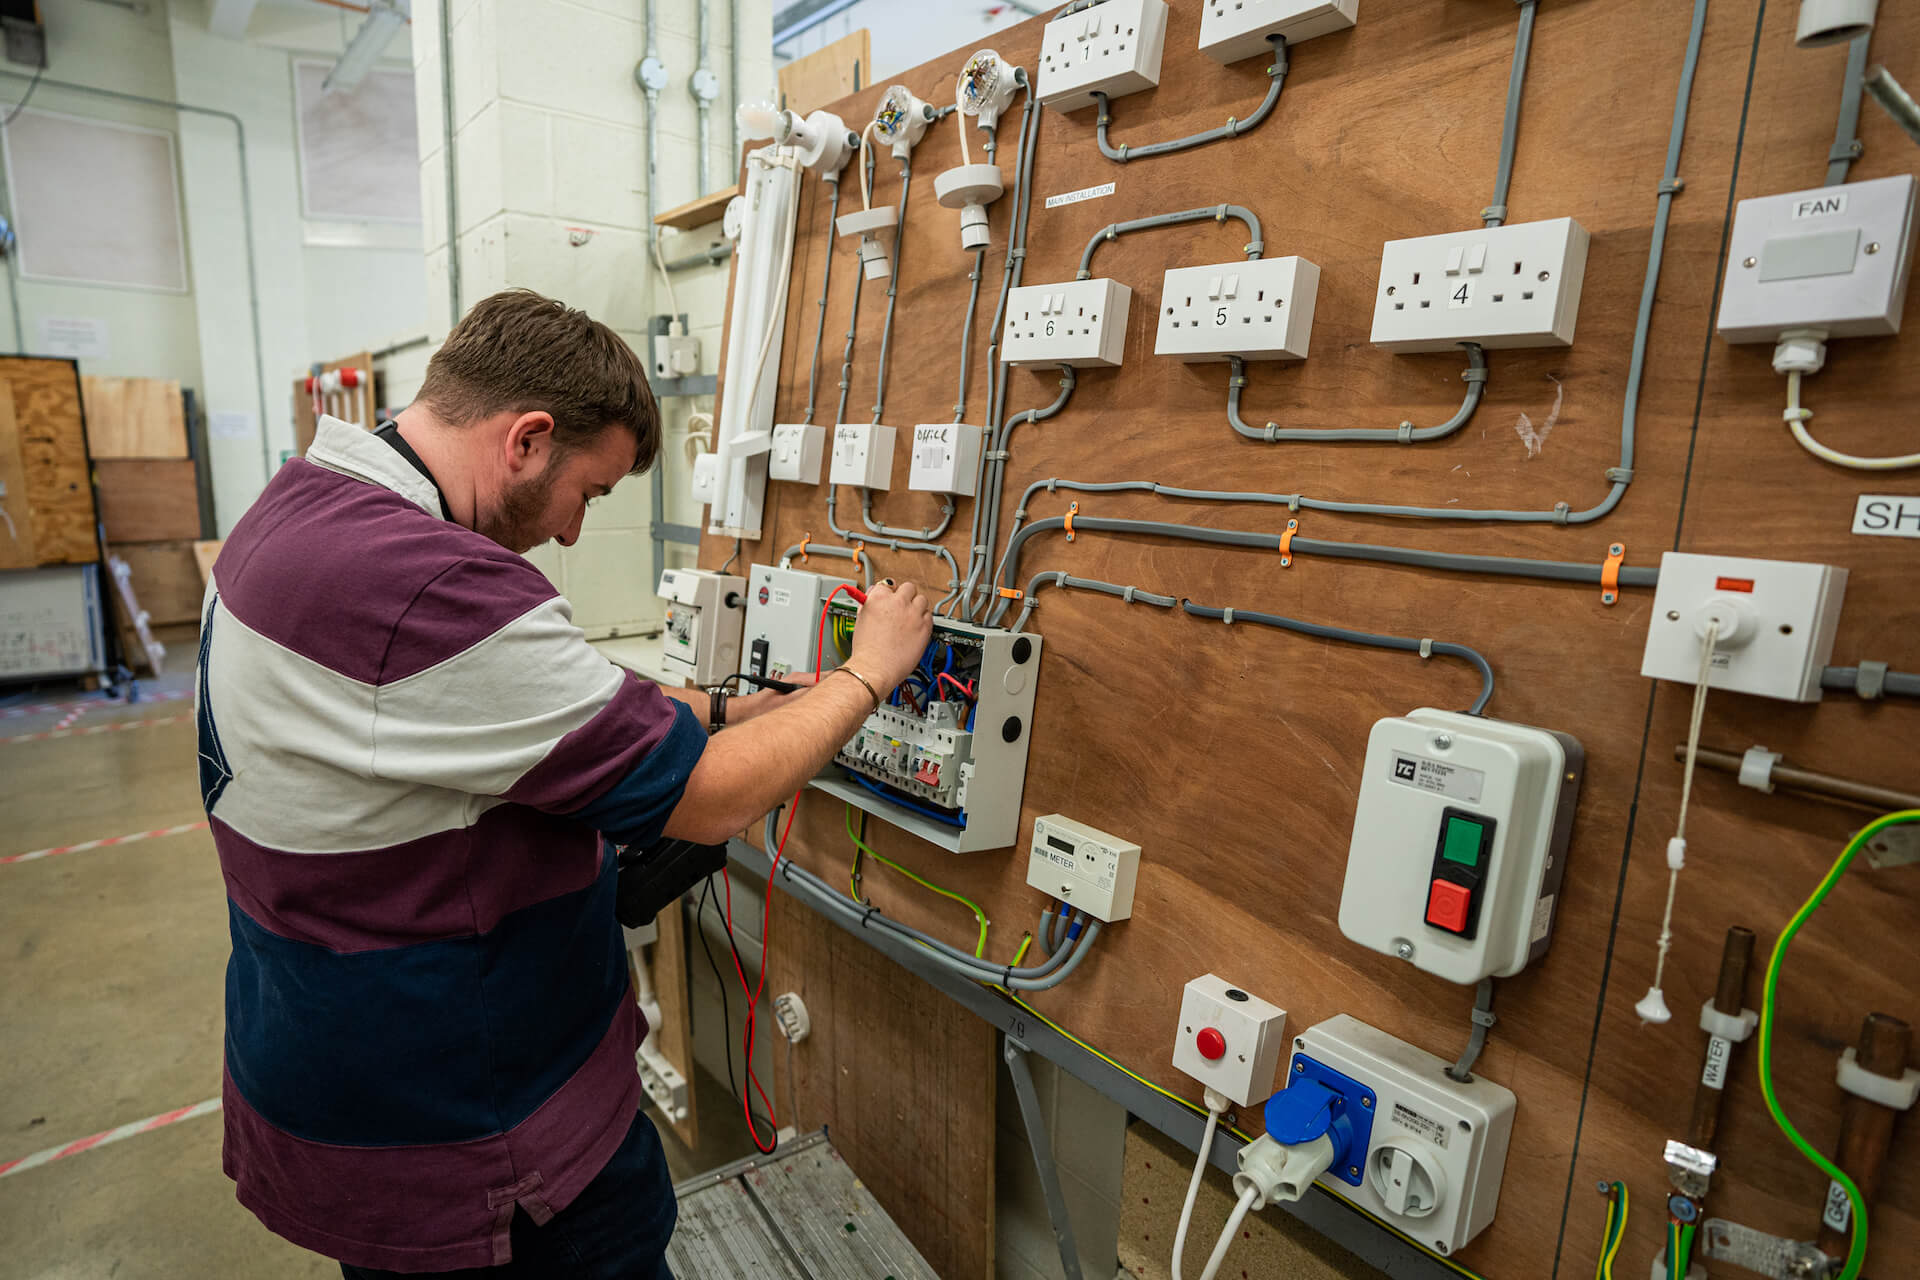 Keighley College Electrical Installation student